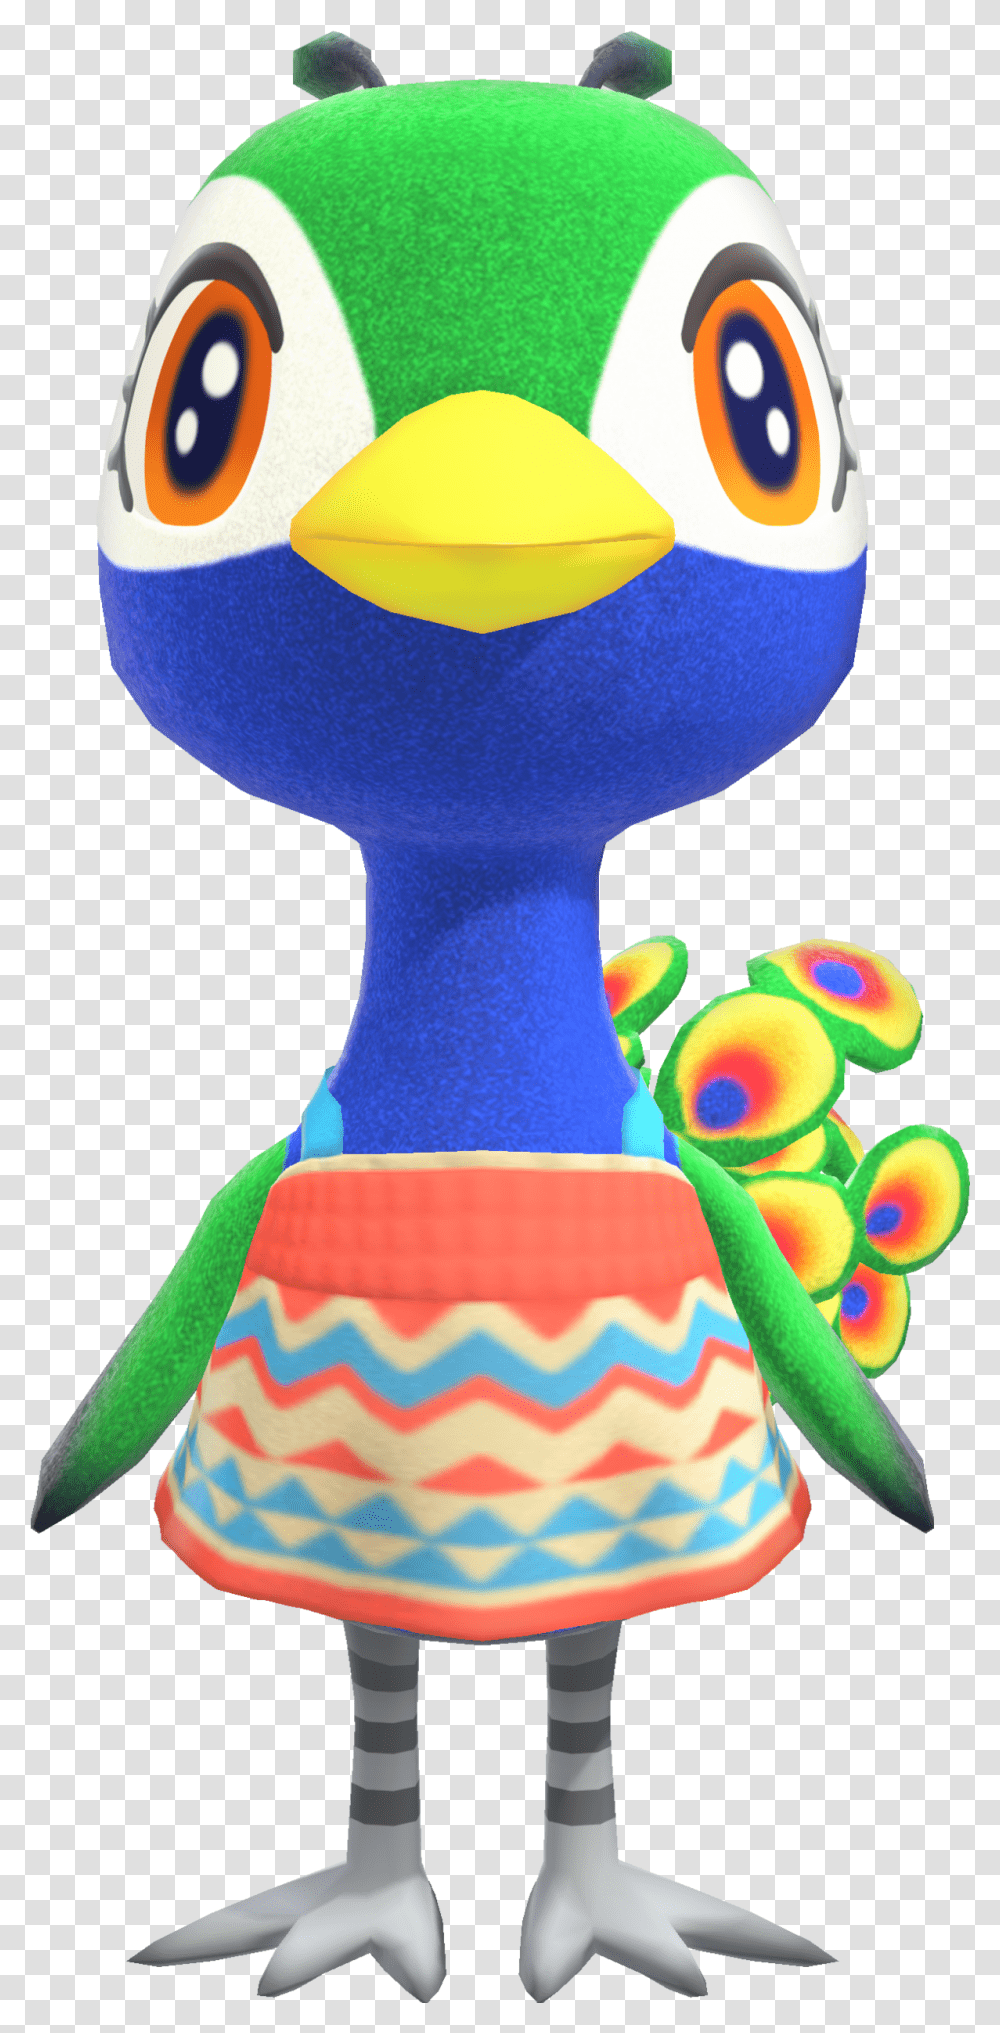 Julia Animal Crossing Wiki Nookipedia Julia Animal Crossing, Toy, Glass, Goblet, Sphere Transparent Png